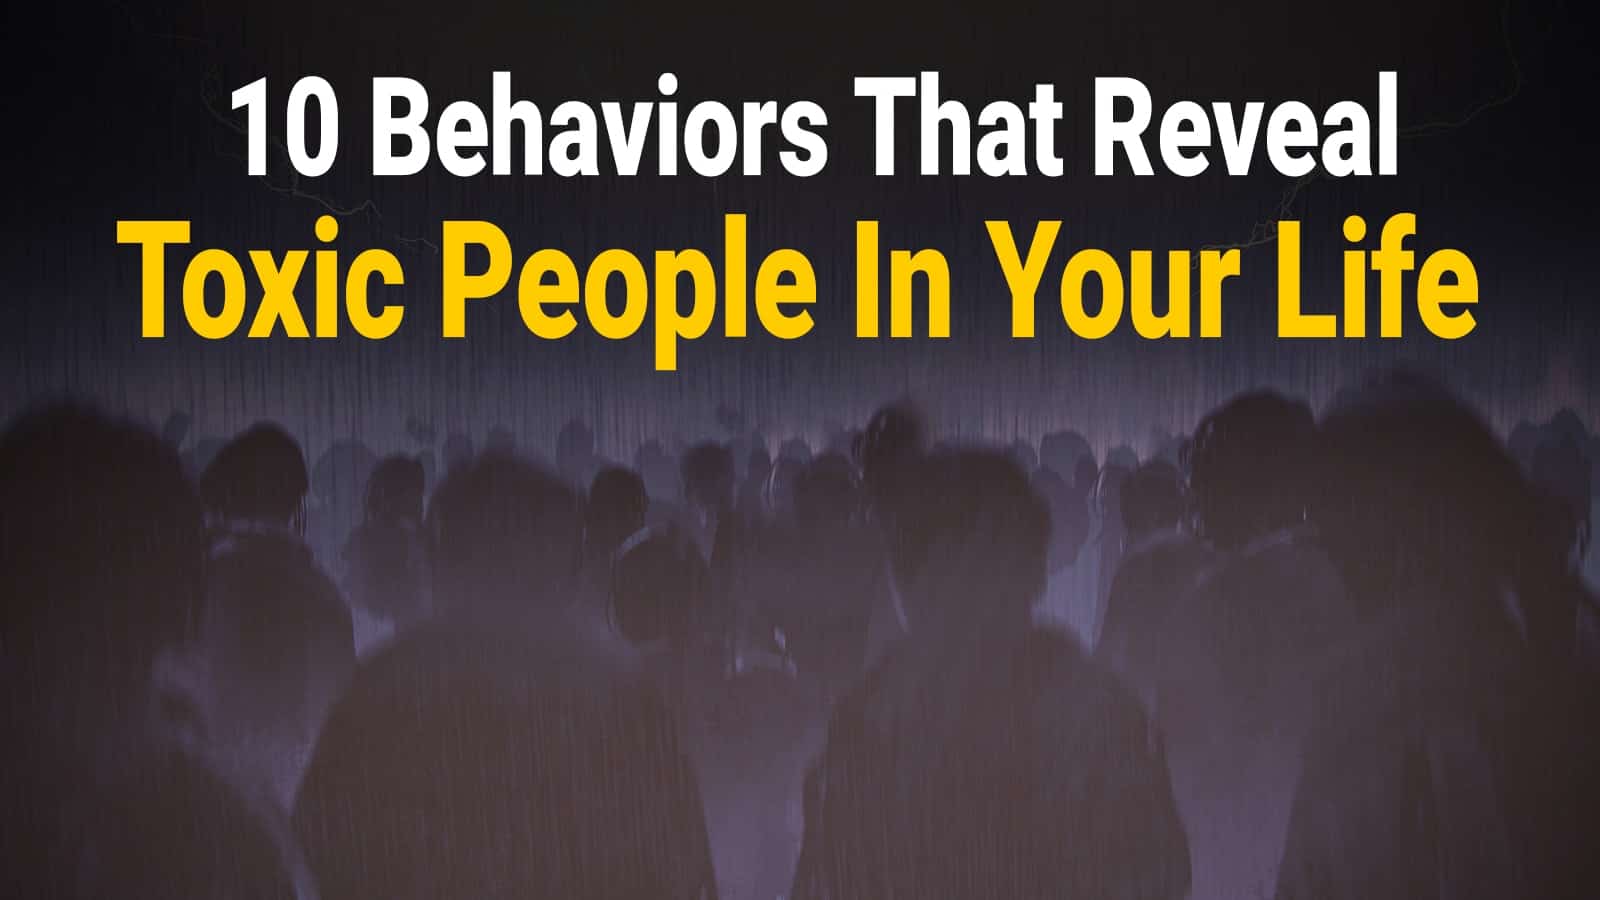 10 Behaviors That Reveal Toxic People In Your Life